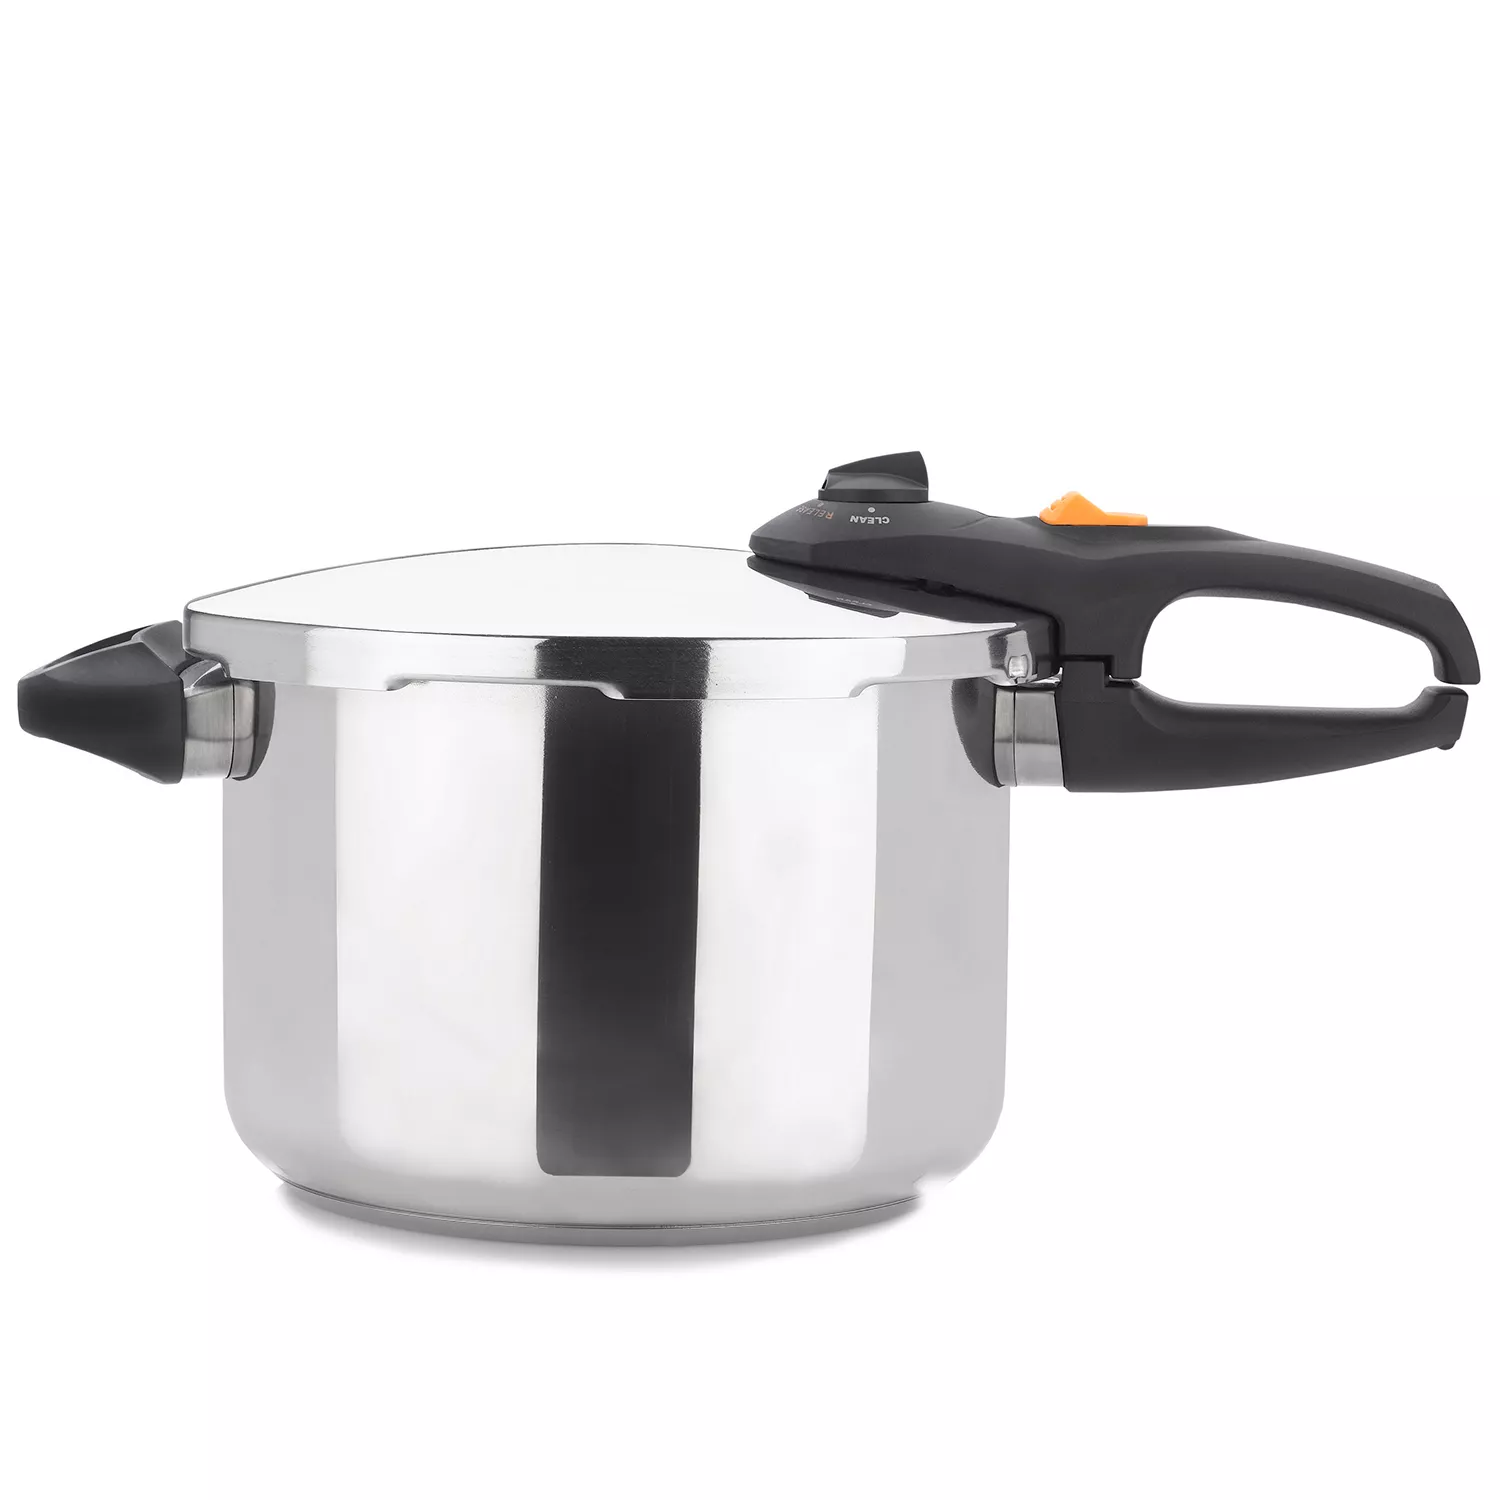 Commercial Chef 13 in 1 Electric Pressure Cooker 6.3 Quart Silver